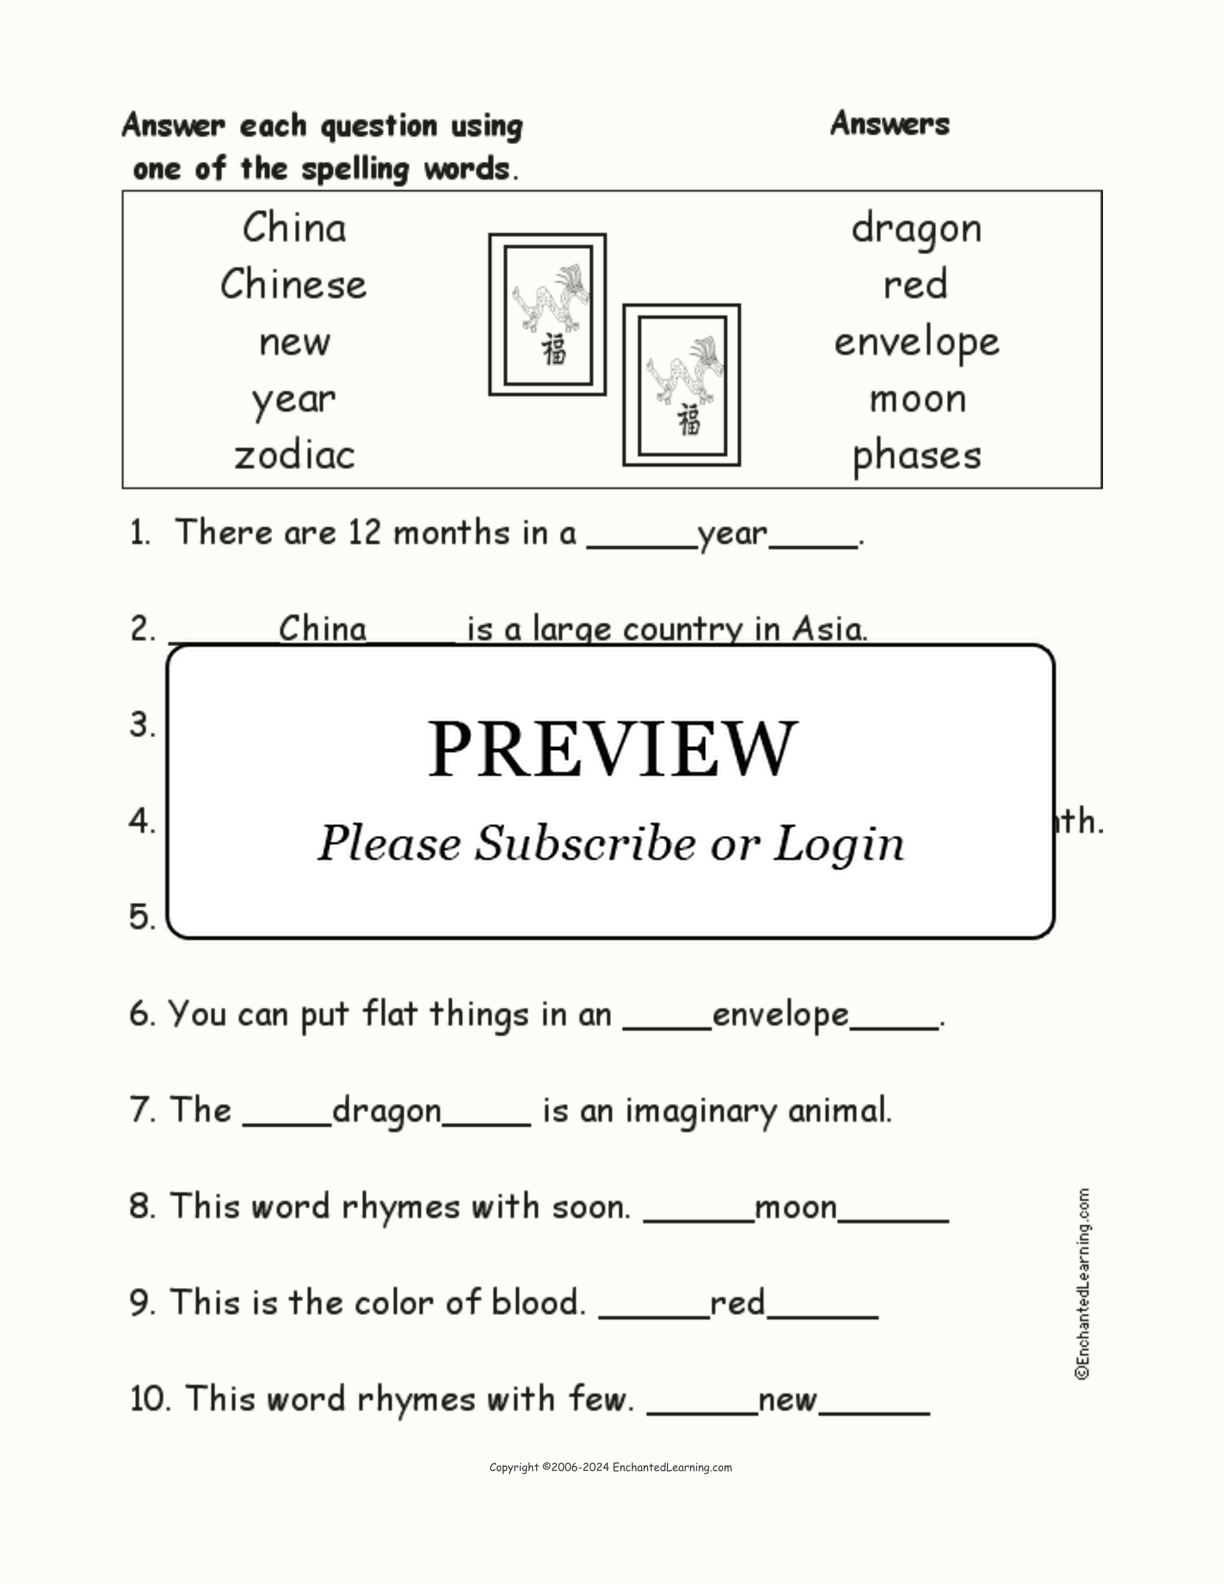 Chinese New Year: Spelling Word Questions interactive worksheet page 2